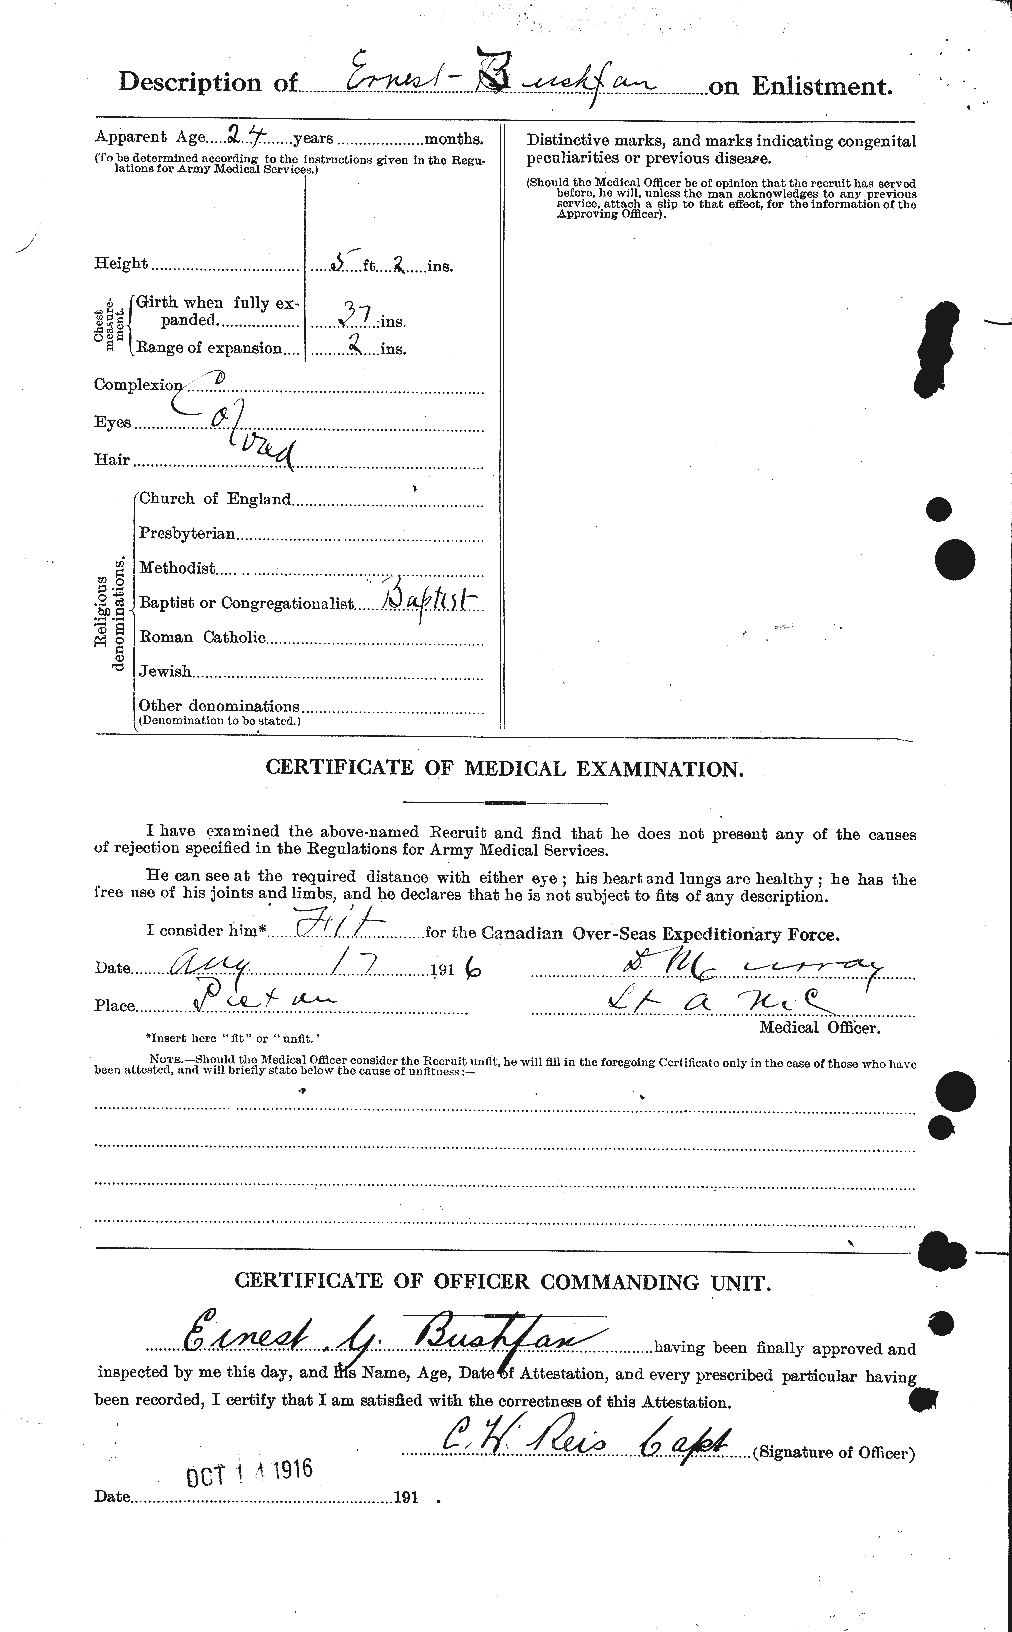 Personnel Records of the First World War - CEF 274510b